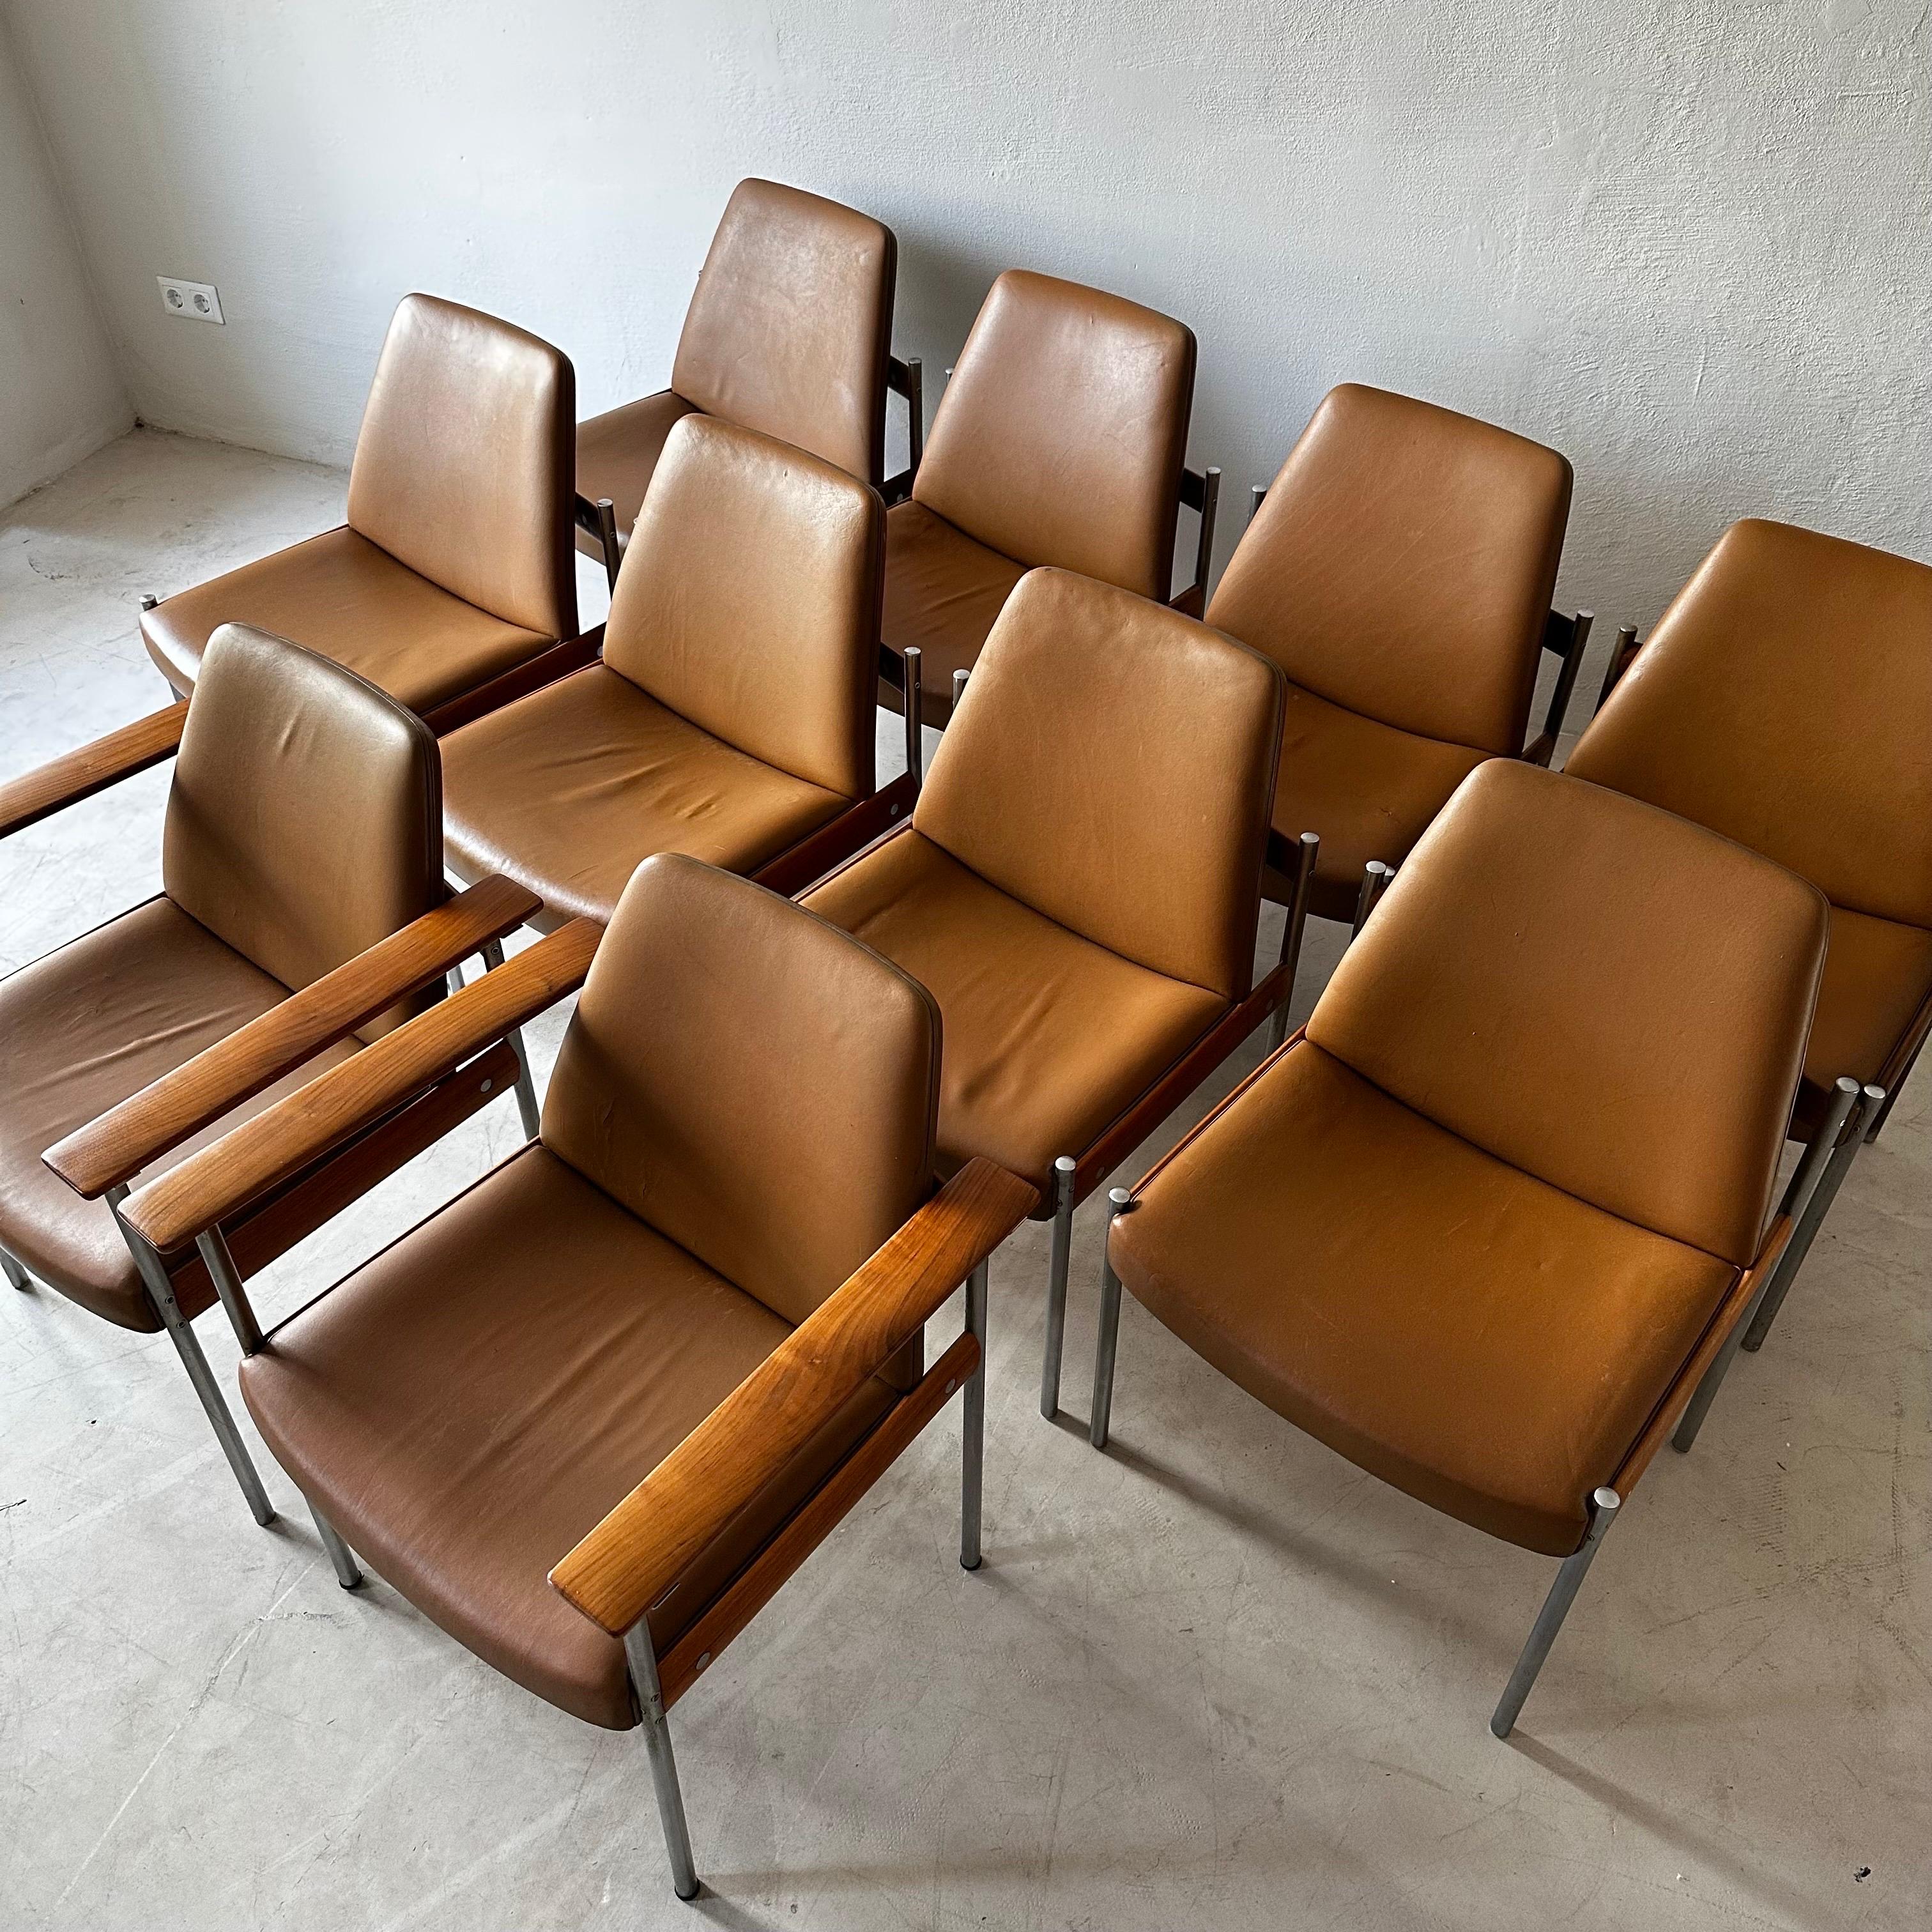 Sven Ivar Dysthe Large Set of 10 Chairs in Cognac Leather and Walnut For Sale 1